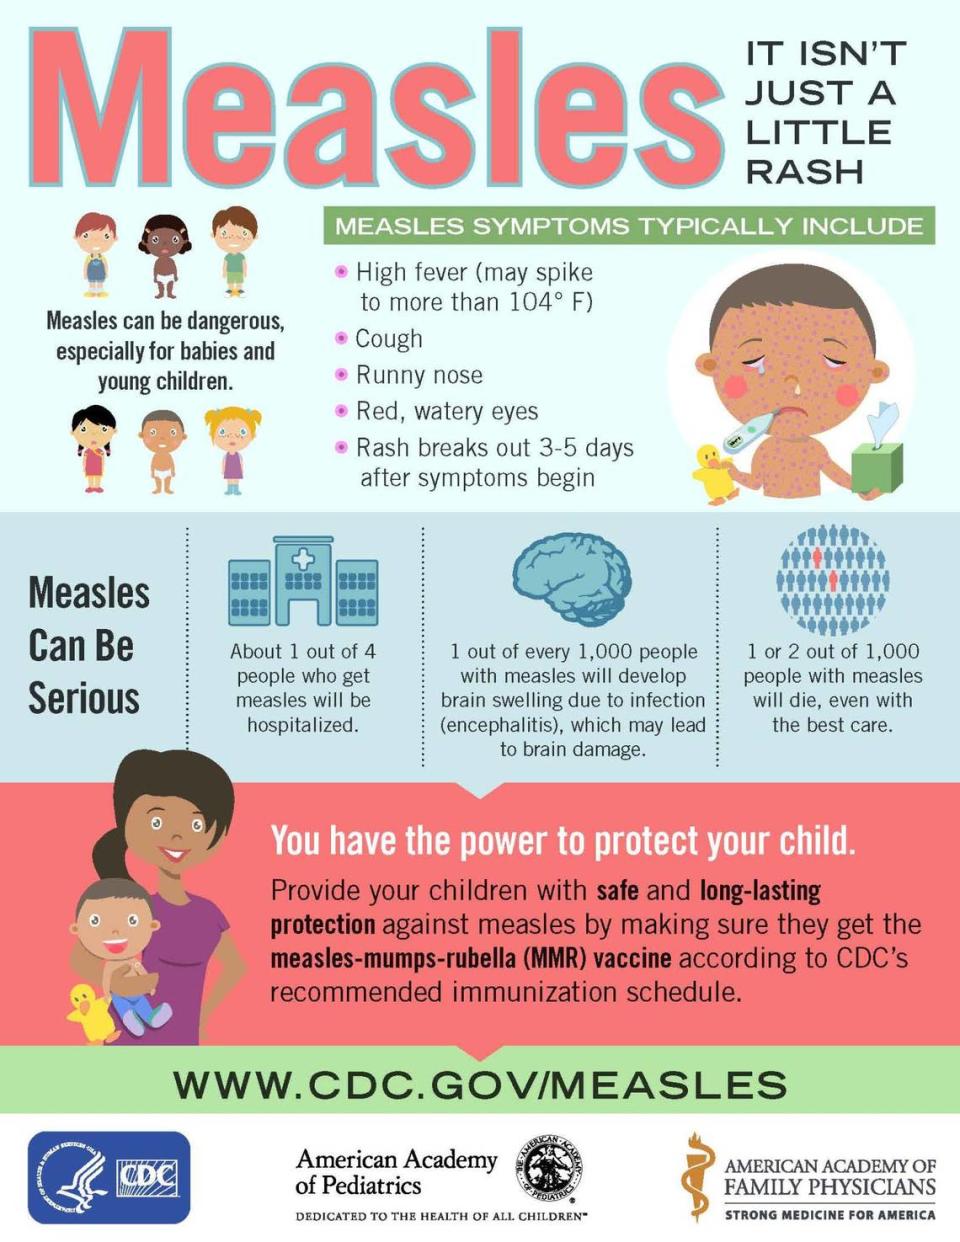 Measles has been eradicated from the U.S. but still appears here as travelers bring the virus back from international travel and then spread it within their community. It’s highly contagious.